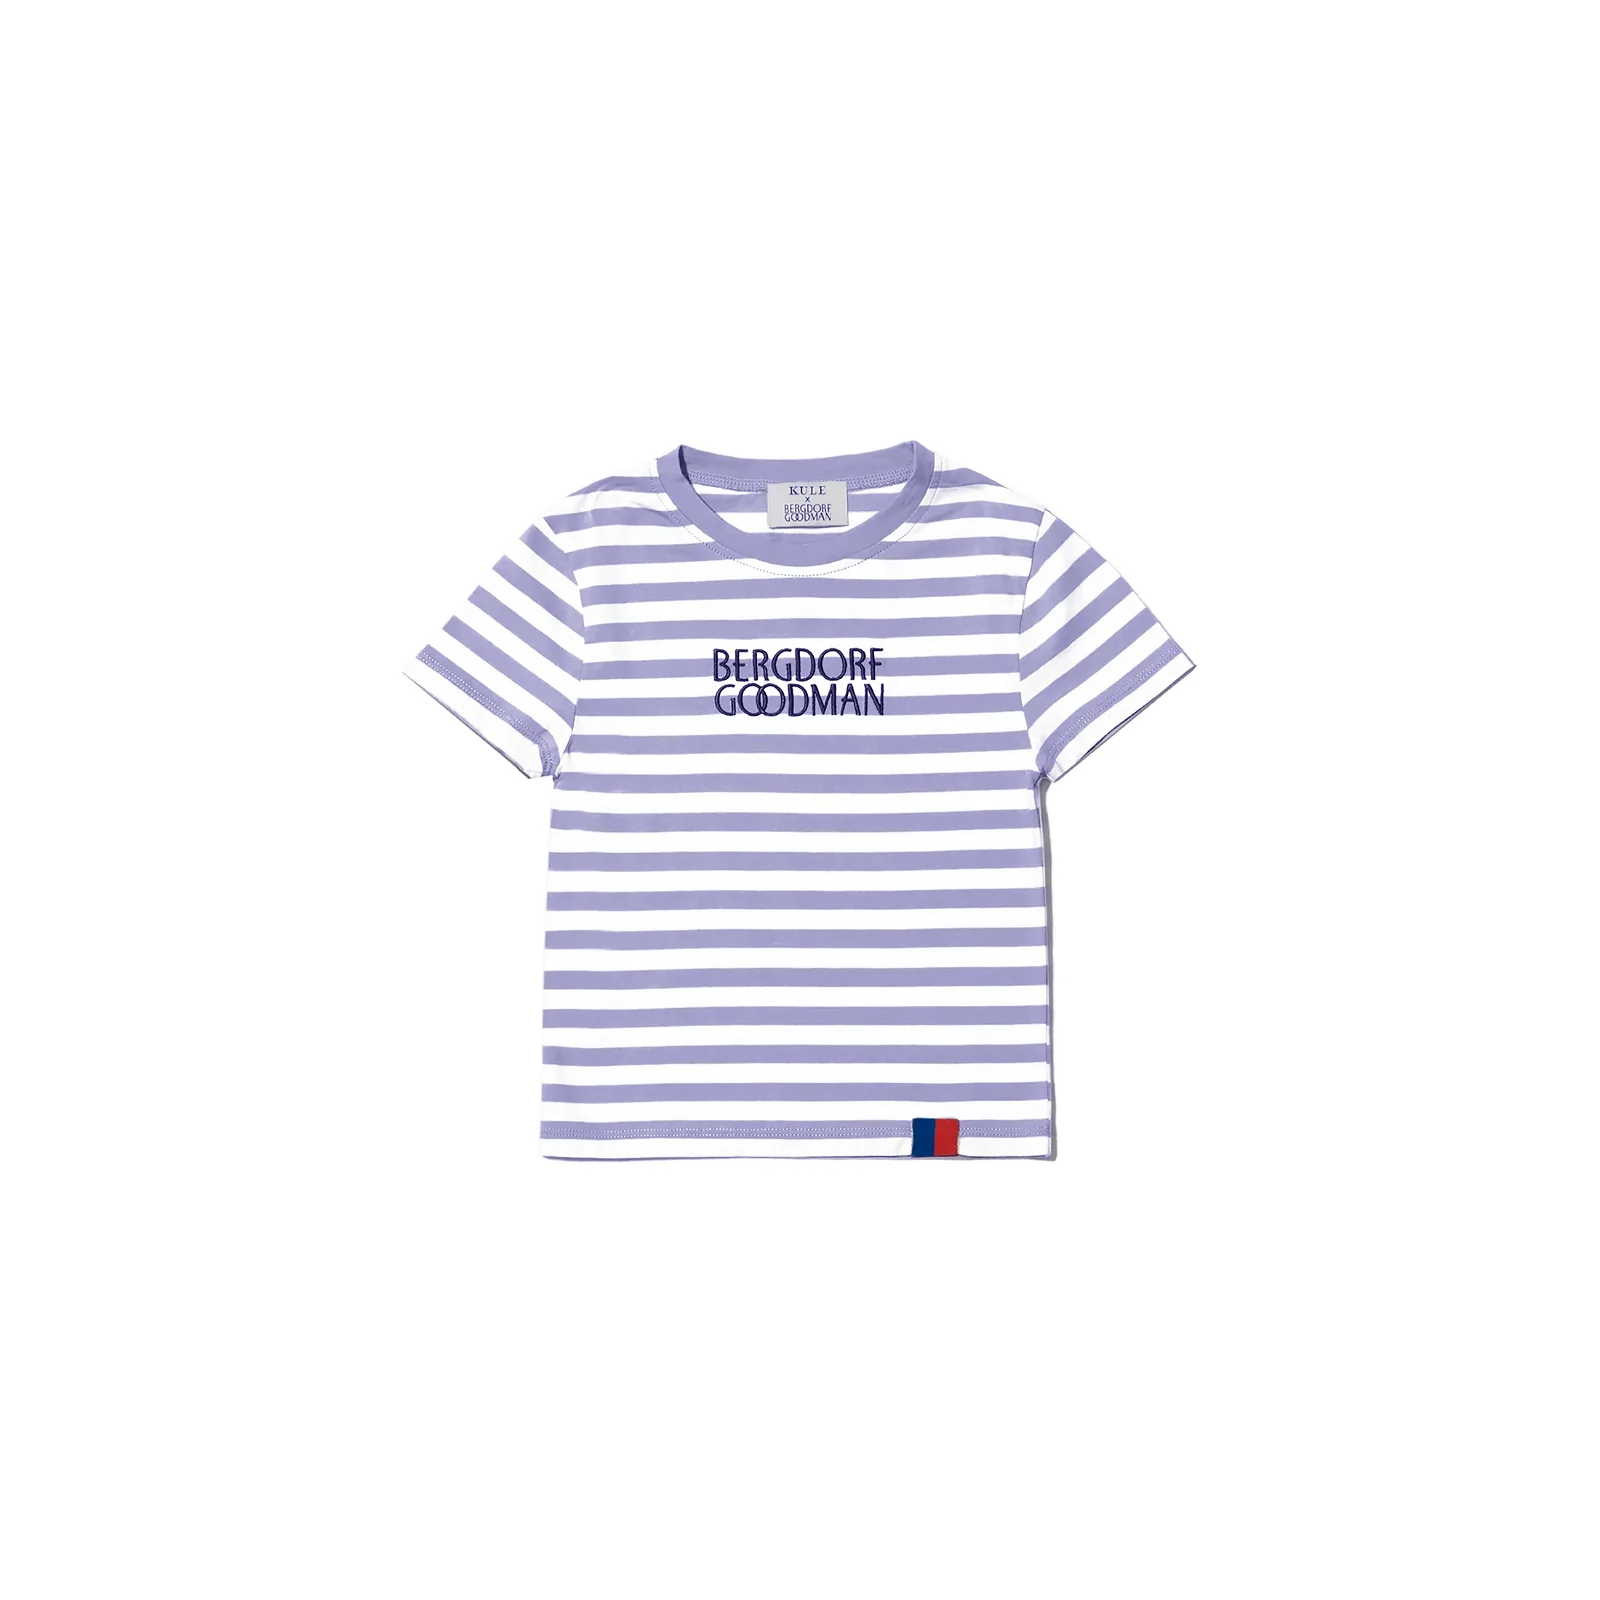 Image of The Charley Bergdorf Goodman - Lavender/White